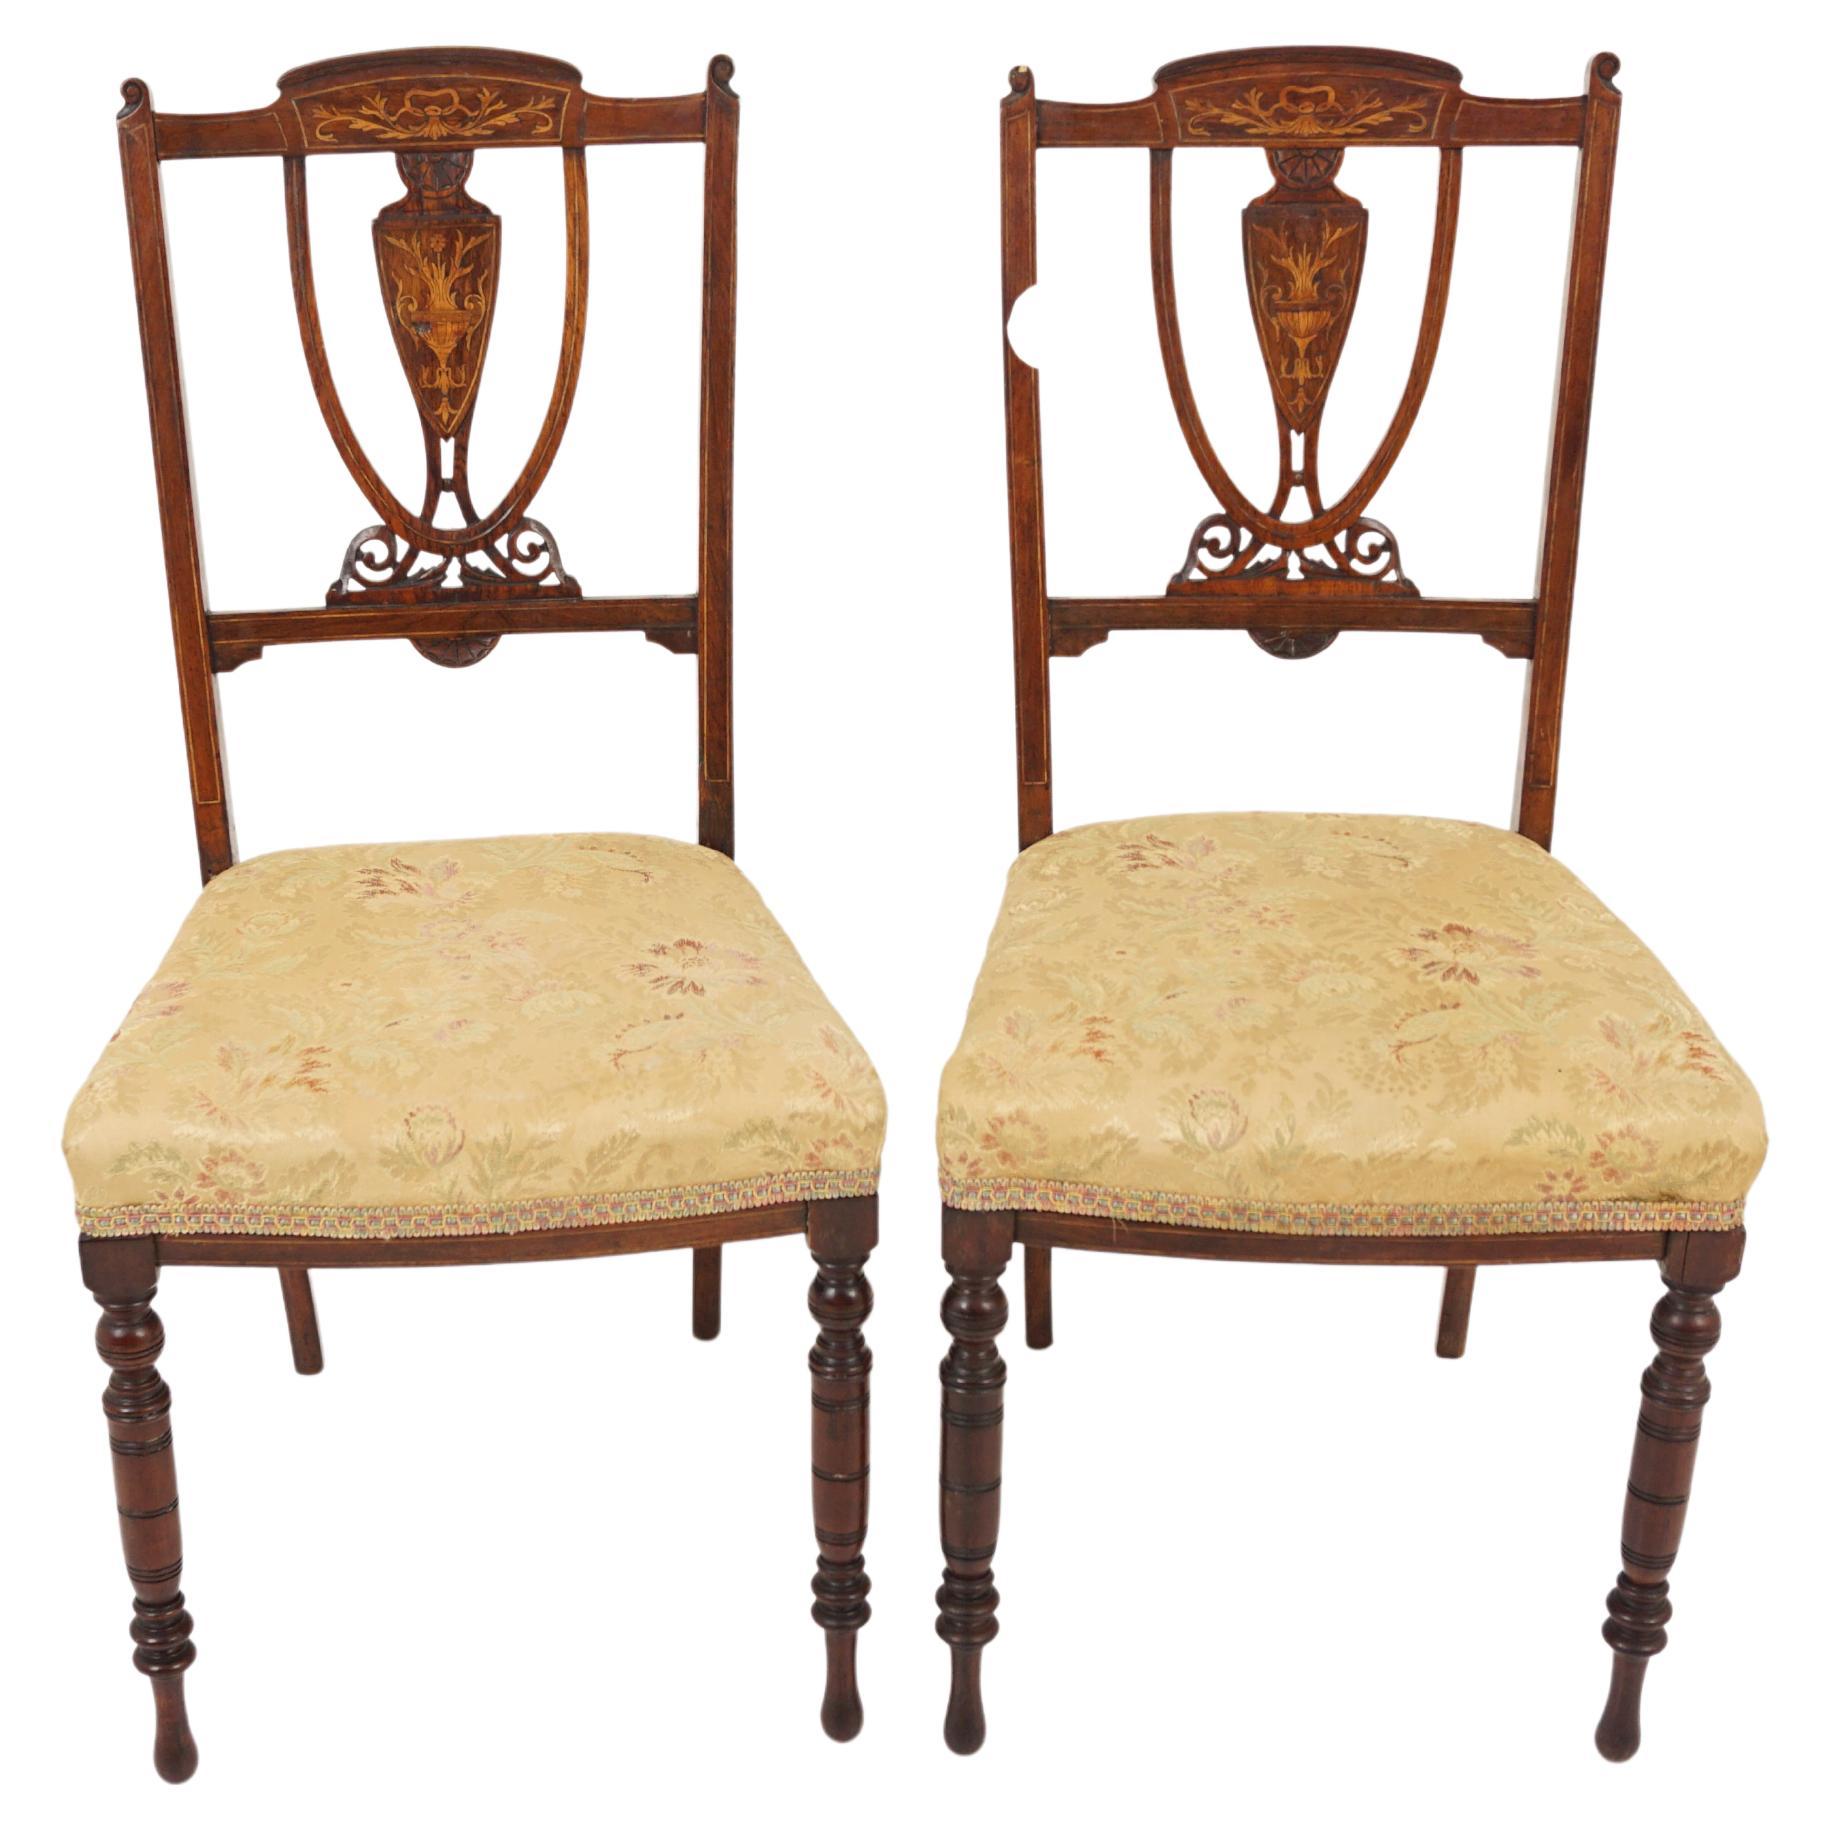 Antique Rosewood Chairs, Pair of Marquetry Side Chairs, Scotland 1900, H1120